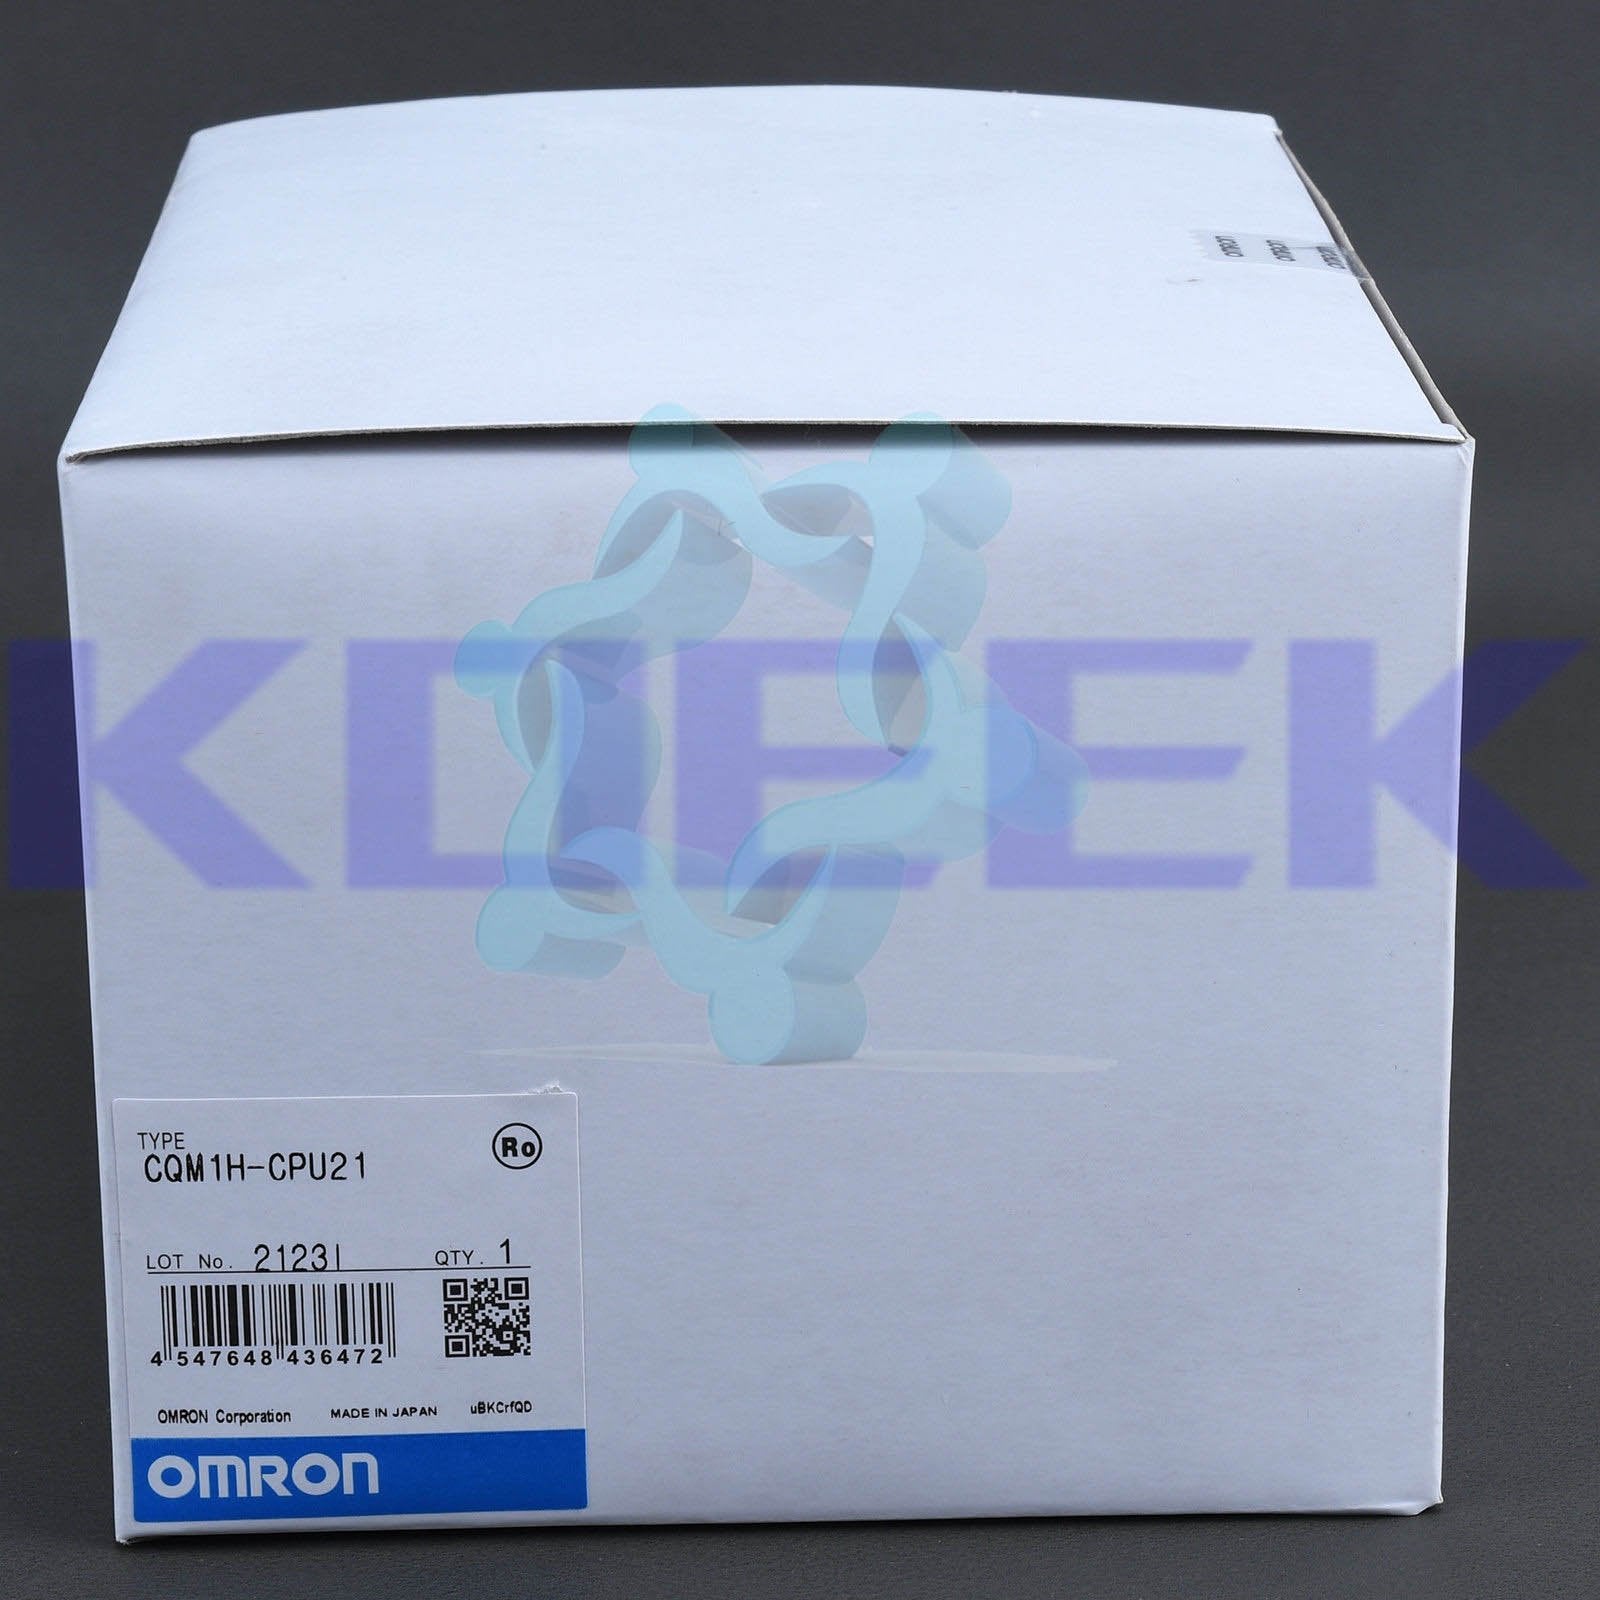 CQM1HCPU21 KOEED 101-200, 80%, import_2020_10_10_031751, Omron, Other